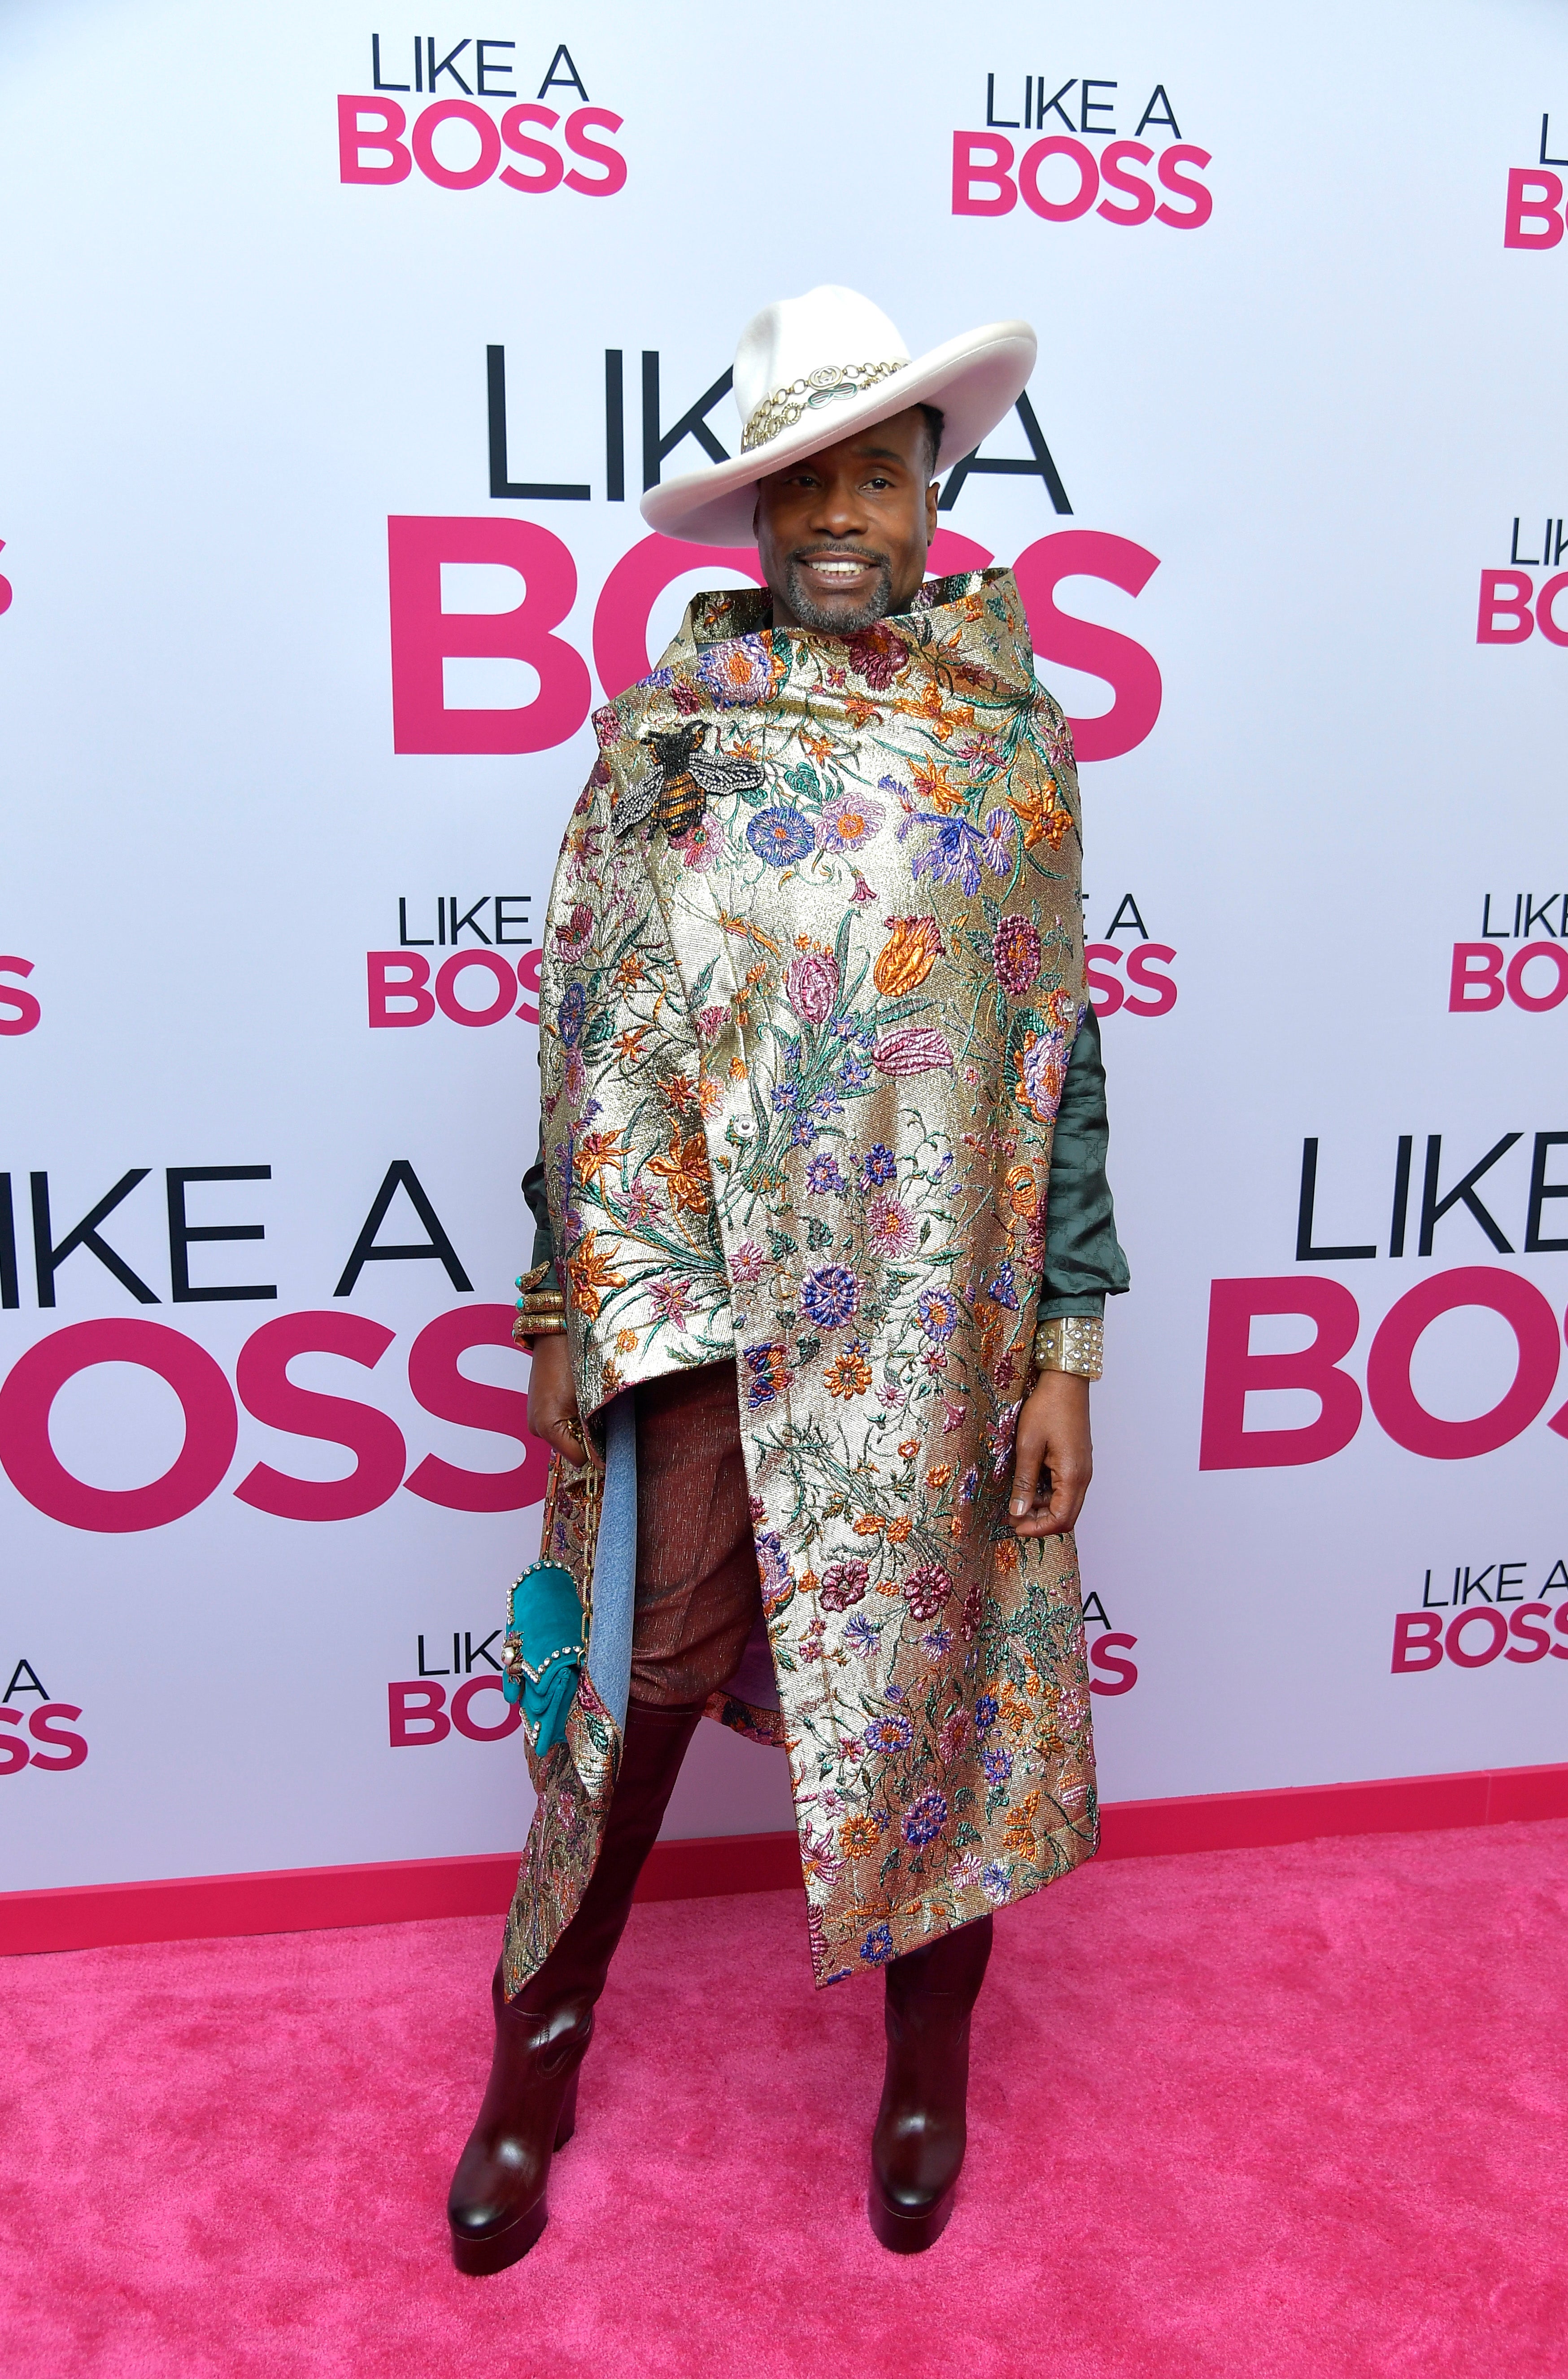 Standout Style Moments At The 'Like A Boss' Premiere